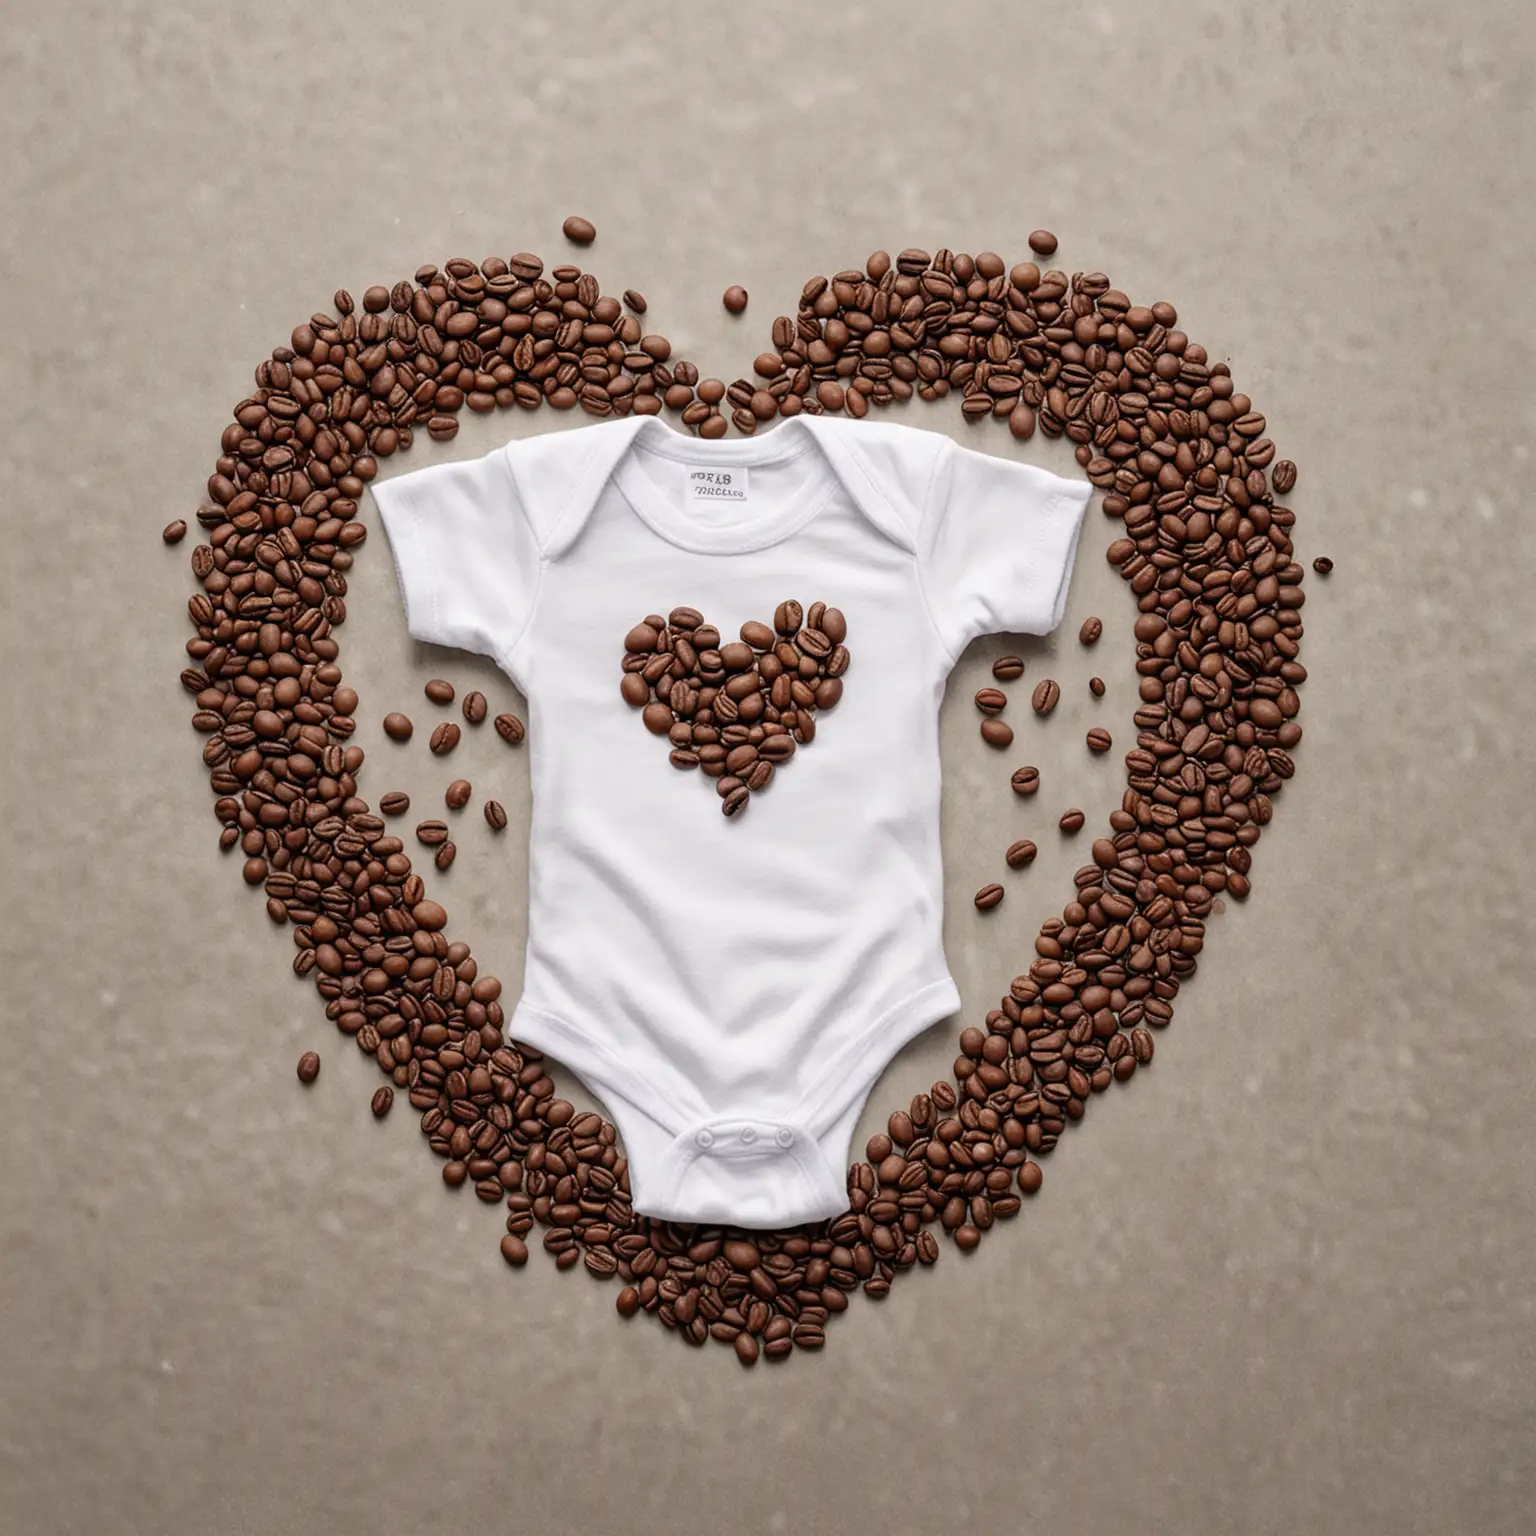 flat lay image, white Baby onesie, spilt coffee beans, beans in the shape of a heart